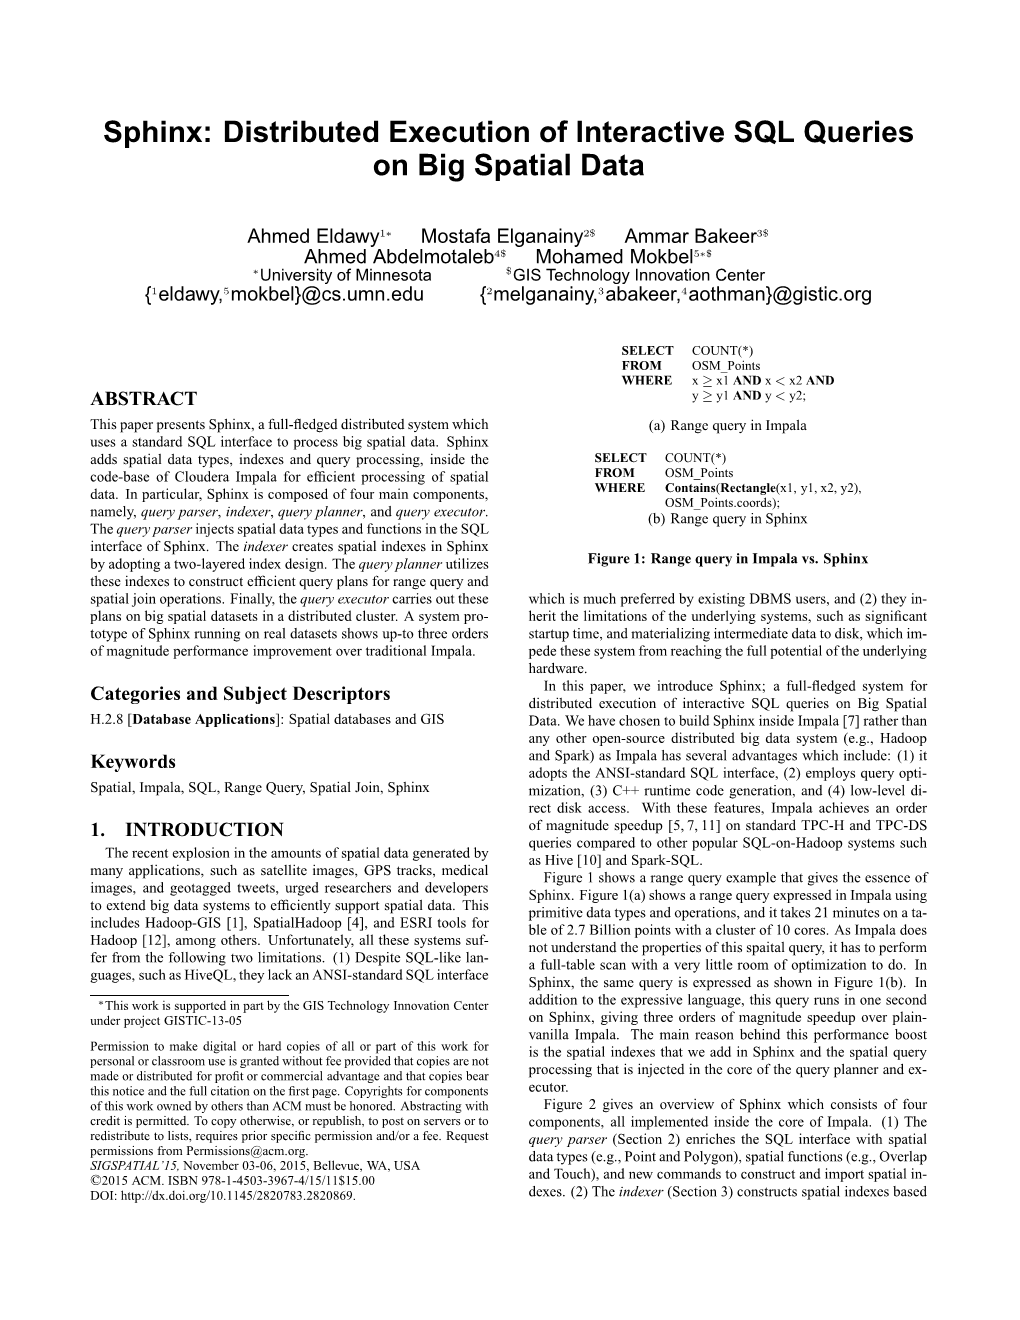 Distributed Execution of Interactive SQL Queries on Big Spatial Data